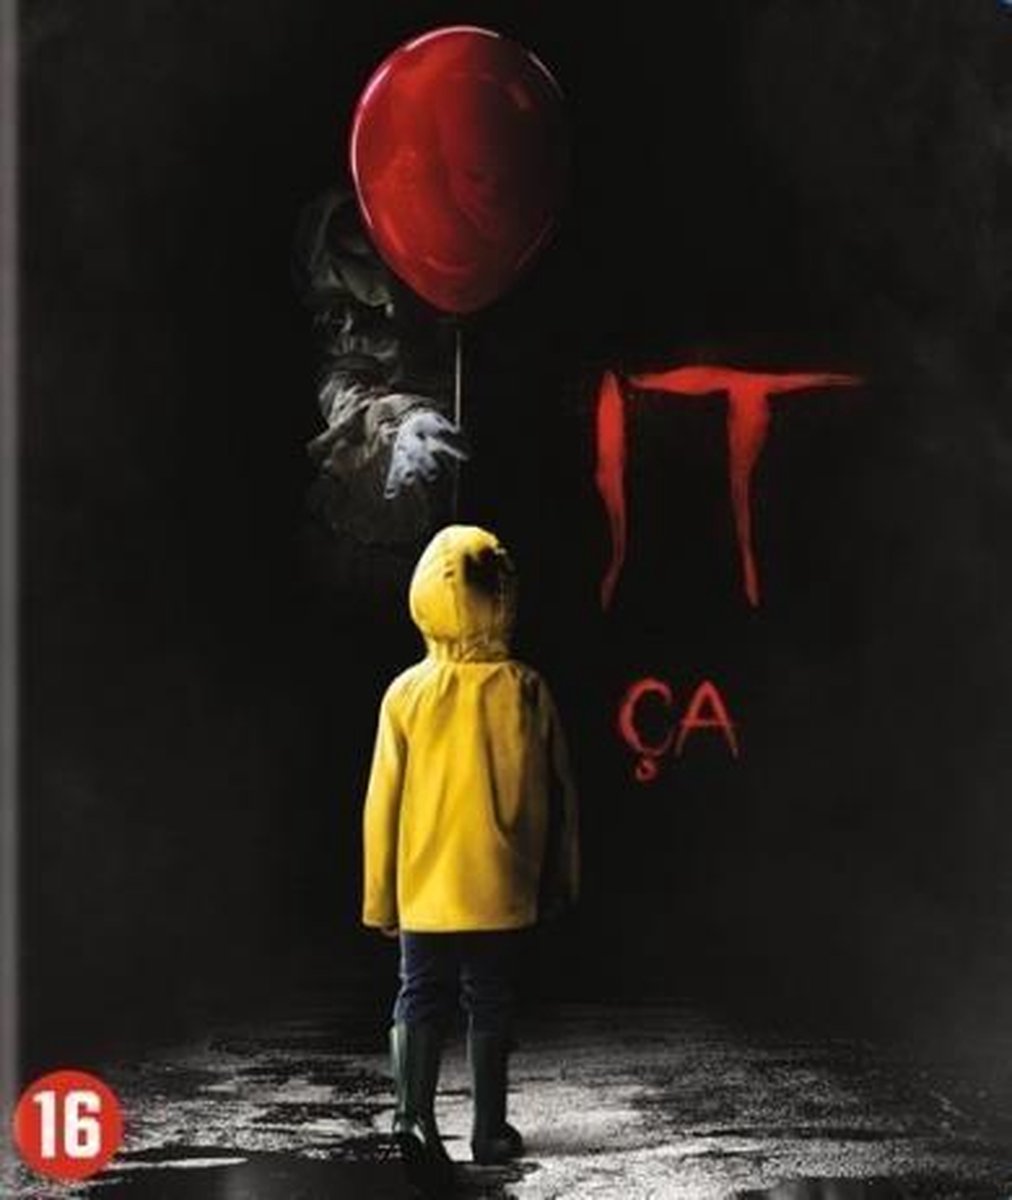 It - Chapter One (Blu-ray) (2017) - Warner Home Video